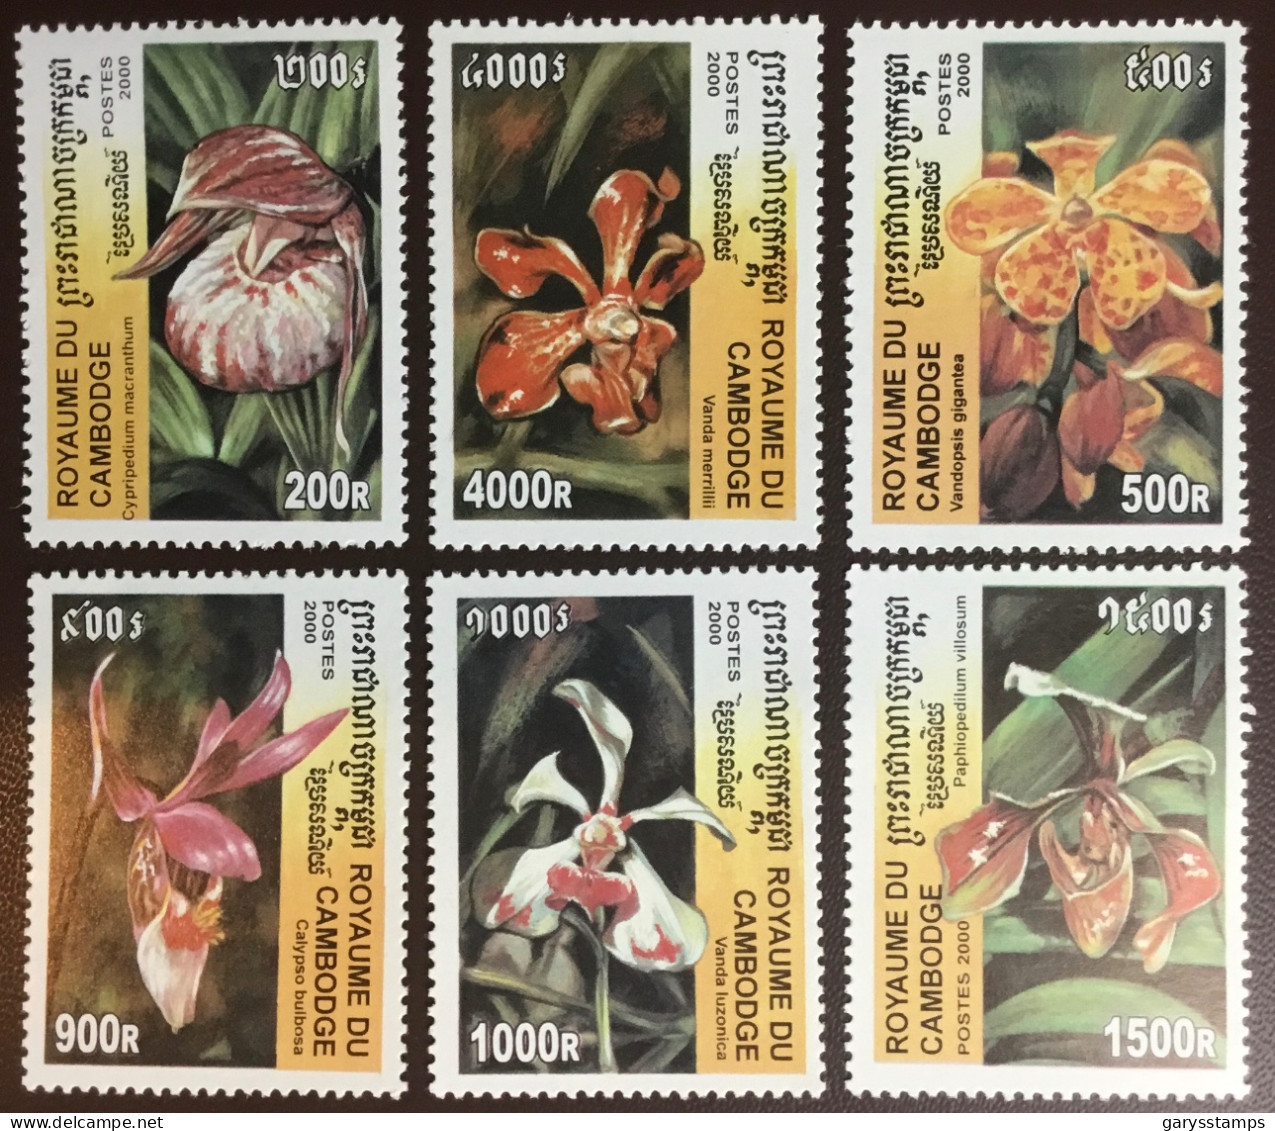 Cambodia 2000 Orchids Flowers MNH - Orchids